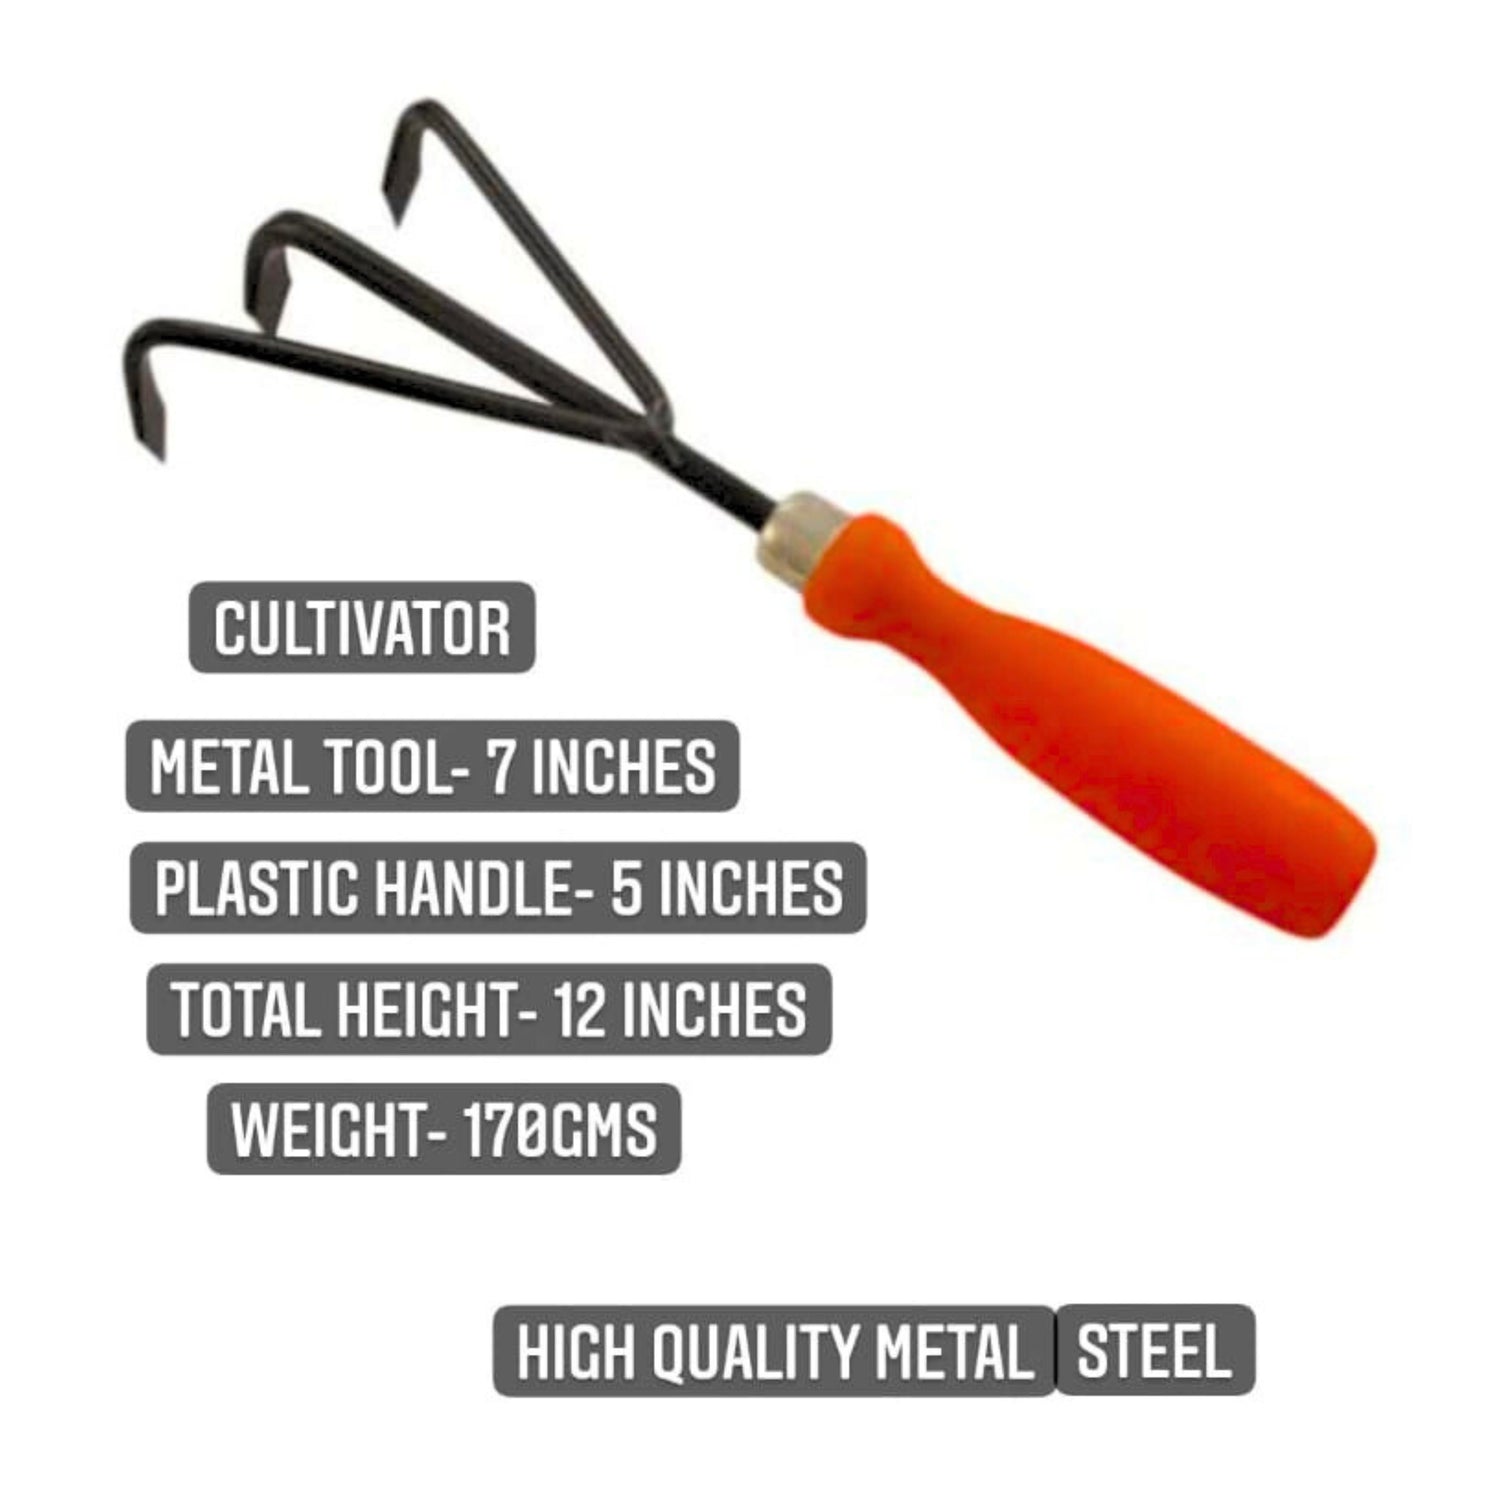 Hand Cultivator with Plastic Handle - Essential Gardening Tool